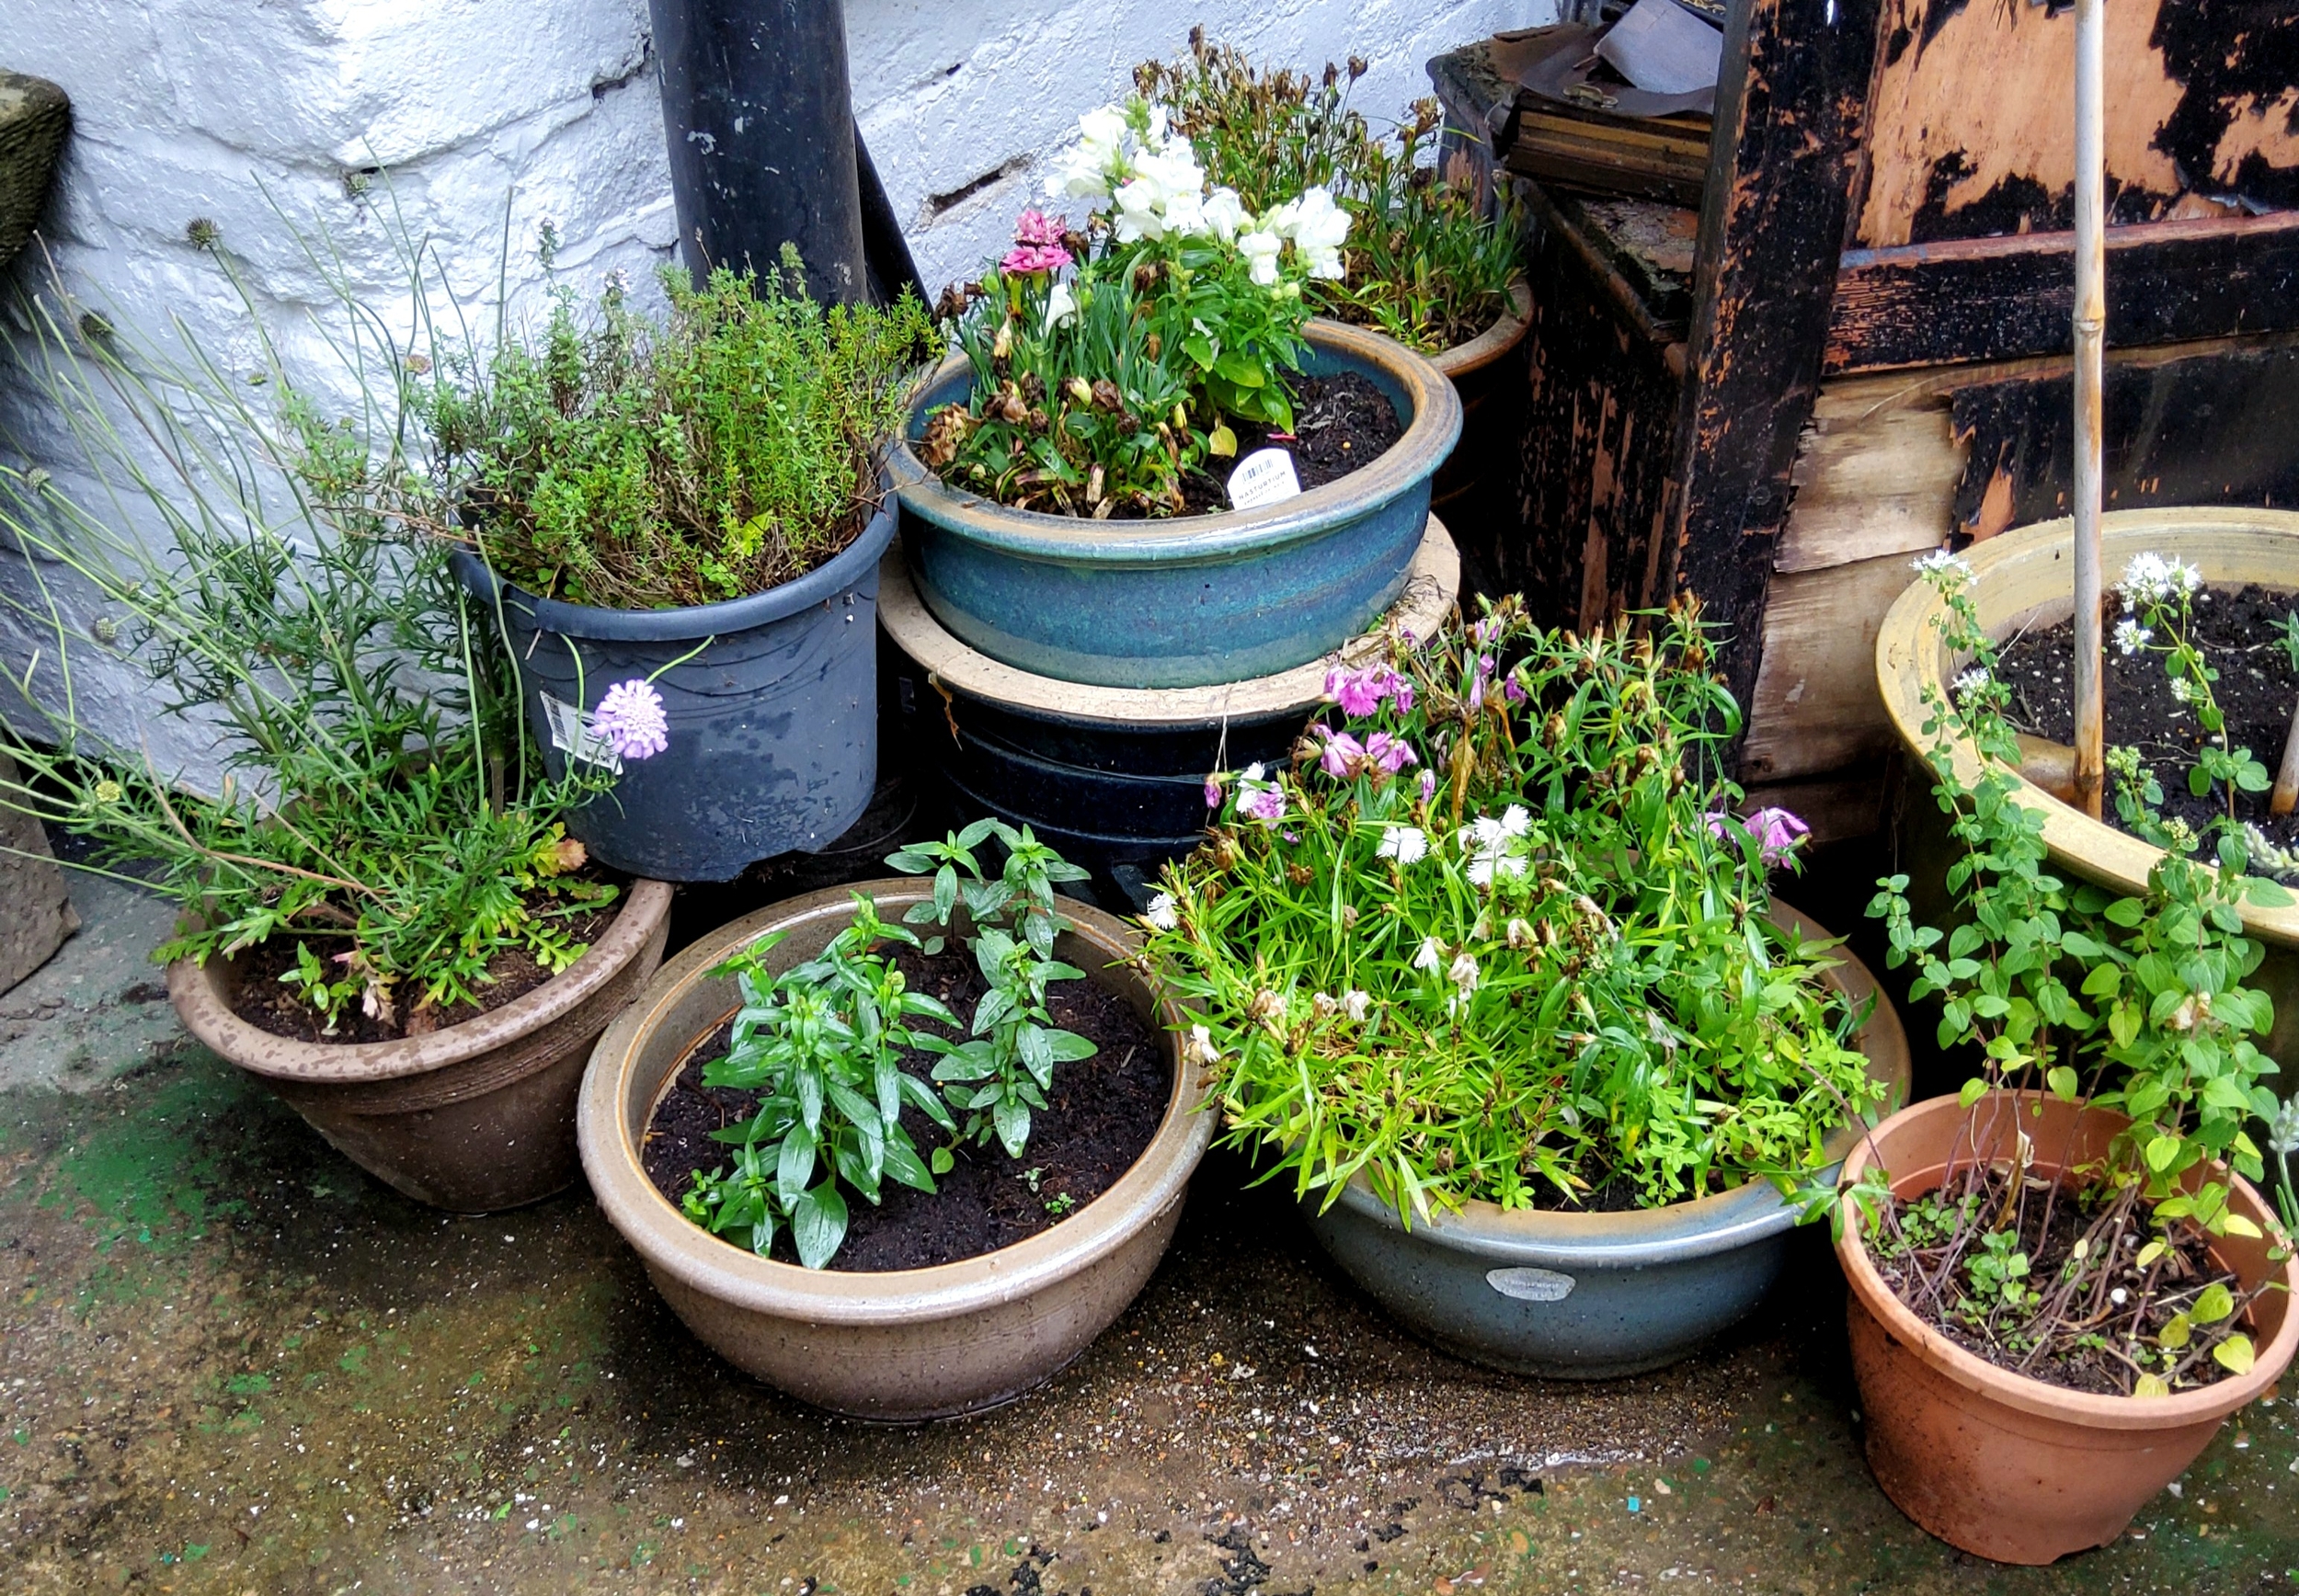 Various drip glazed plant pots and plants (7)